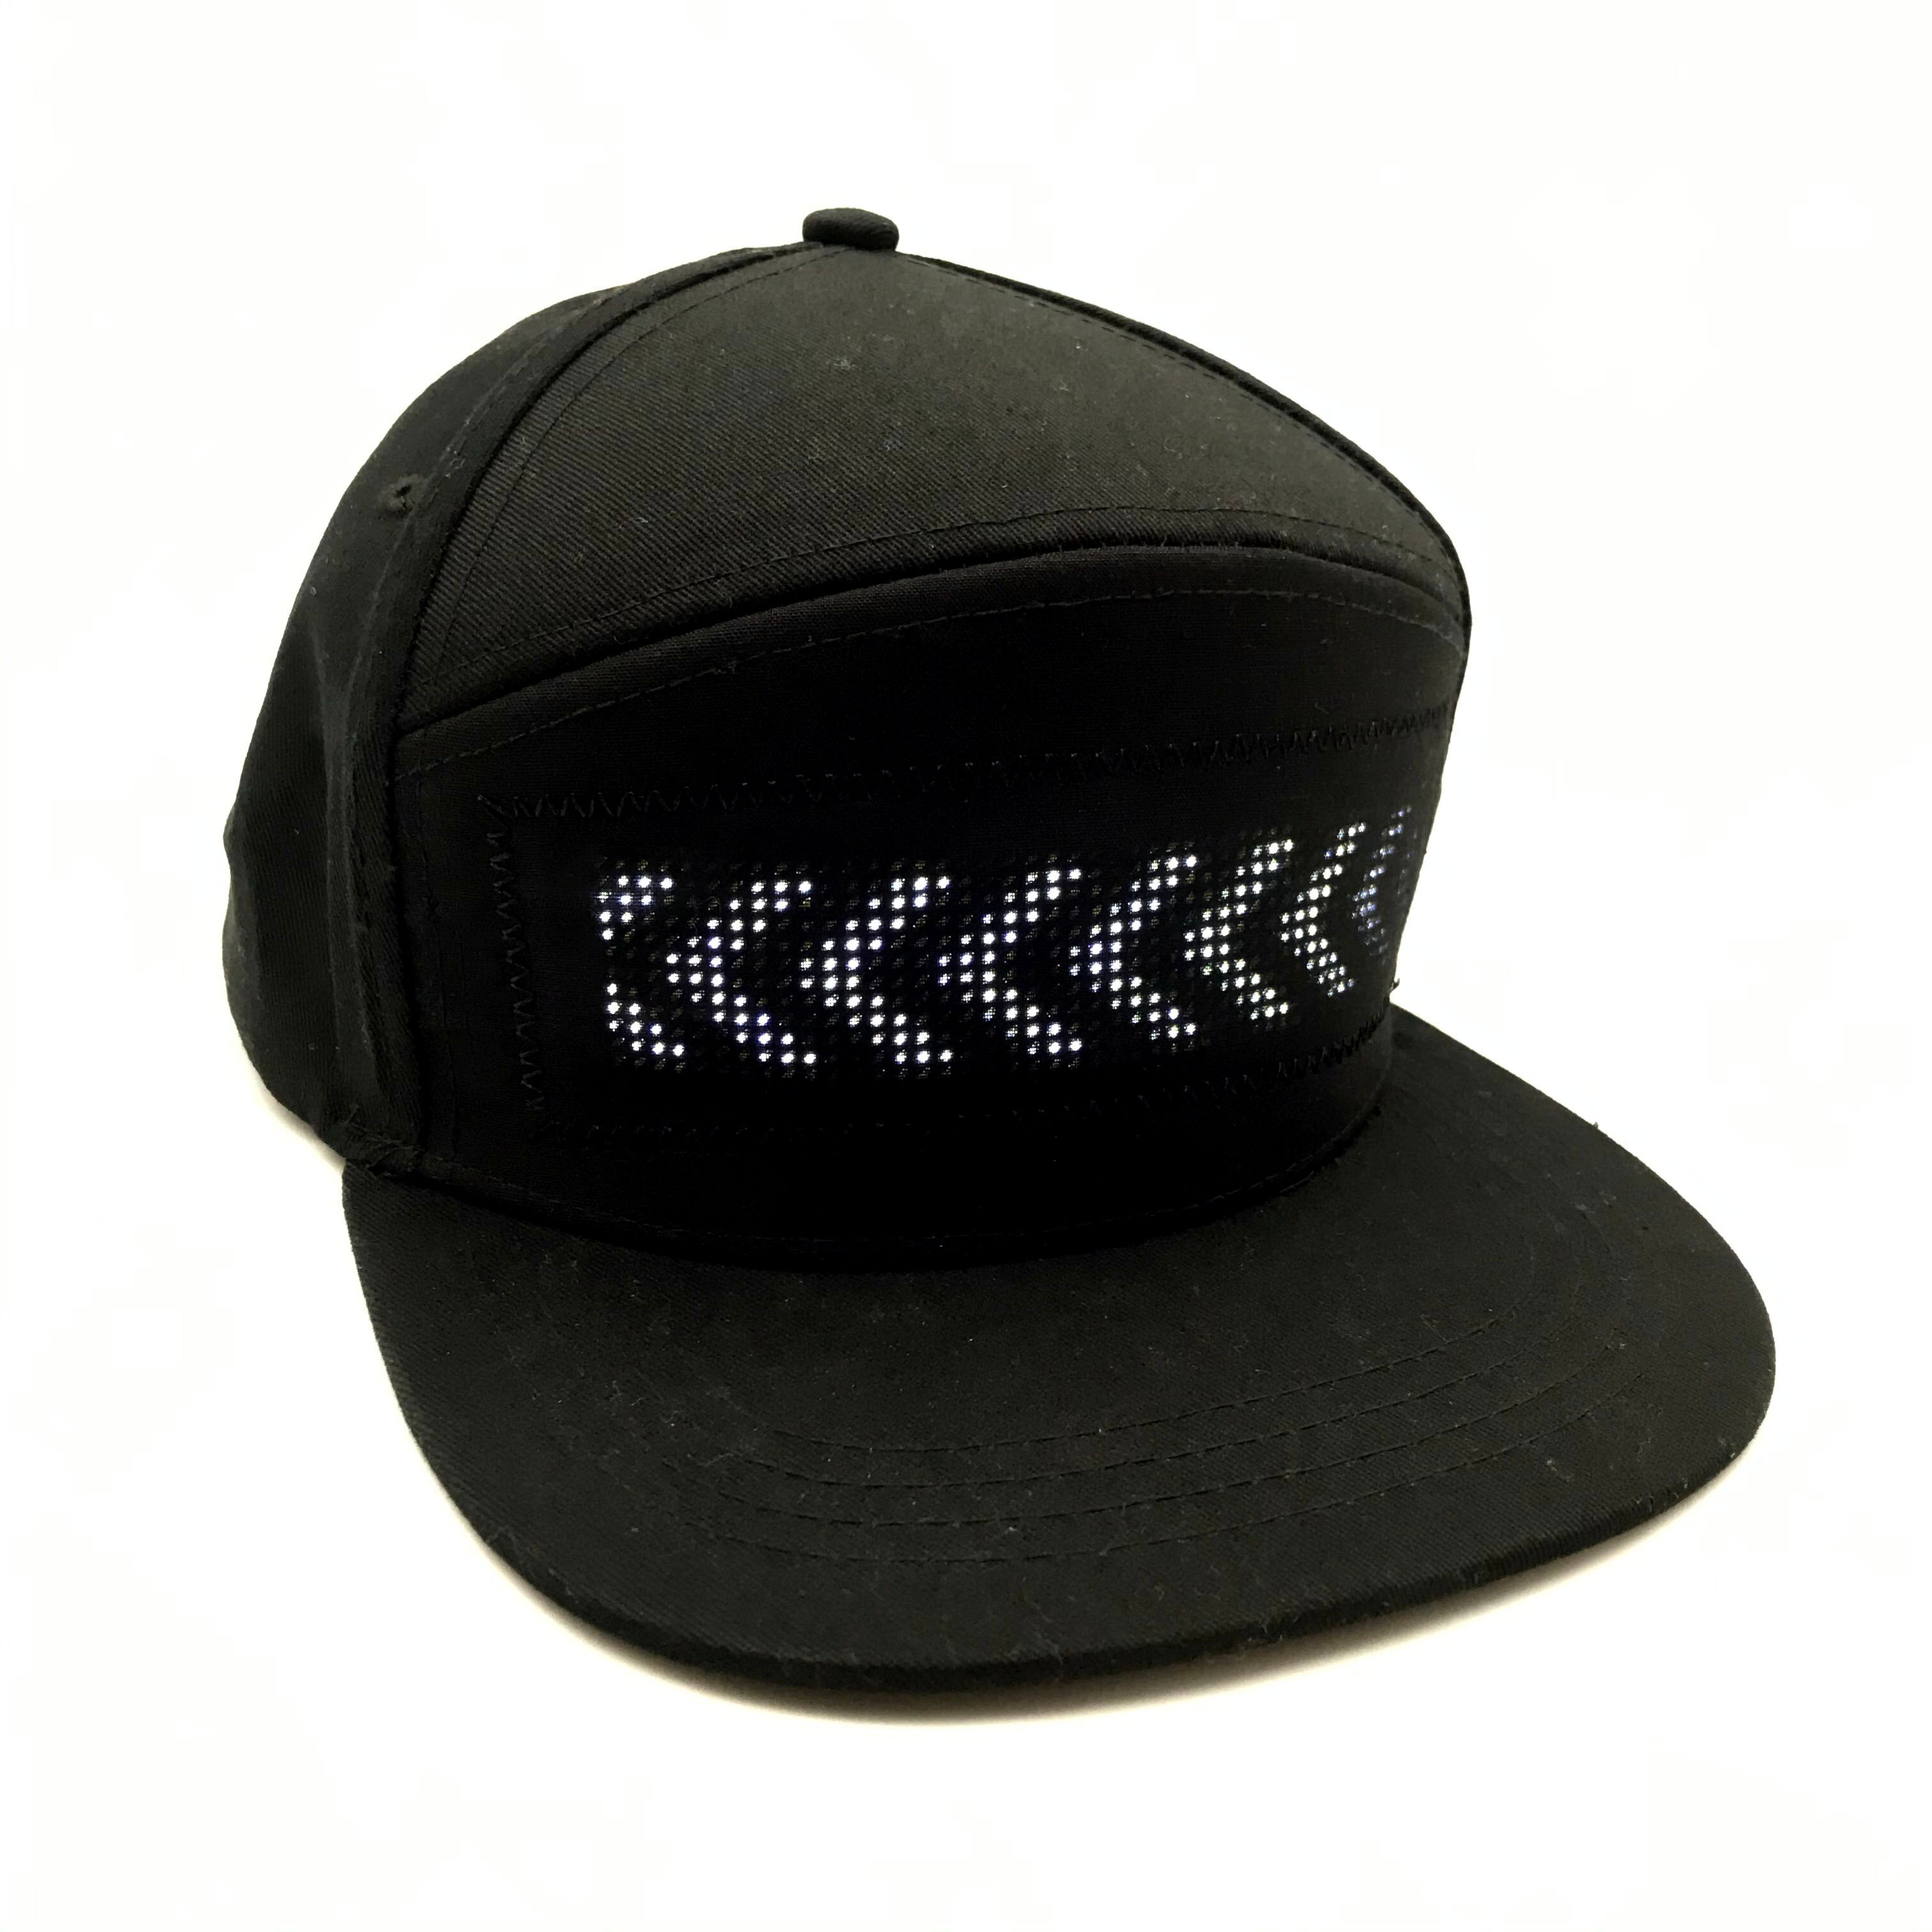 LED Cap, LED Display Screen Smart Hat Bluetooth Adjustable Cool Hat for Party Club: White